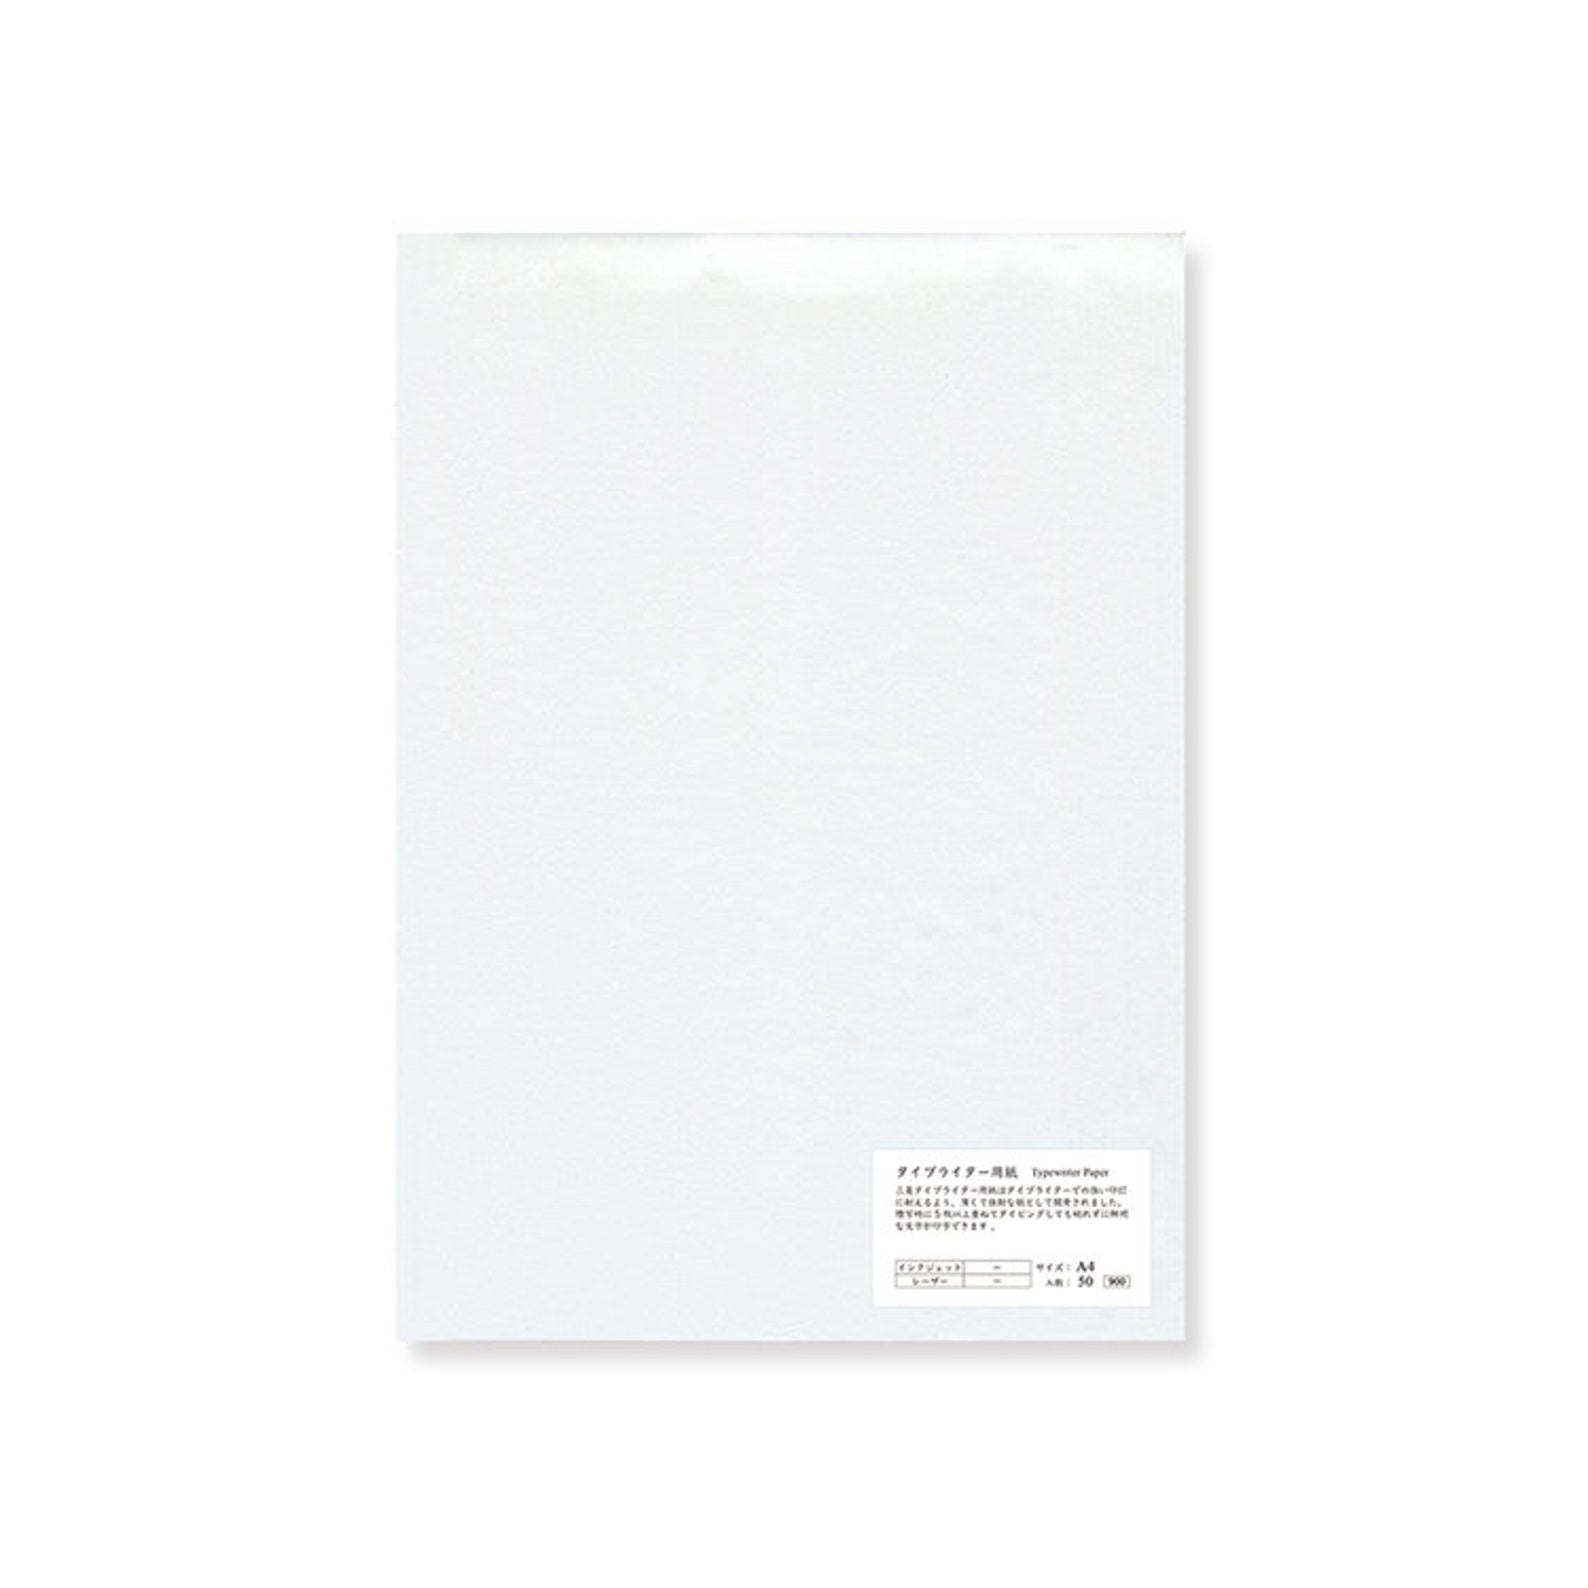 SCHOLAR A4 TYPING PAPER 50 SHEETS